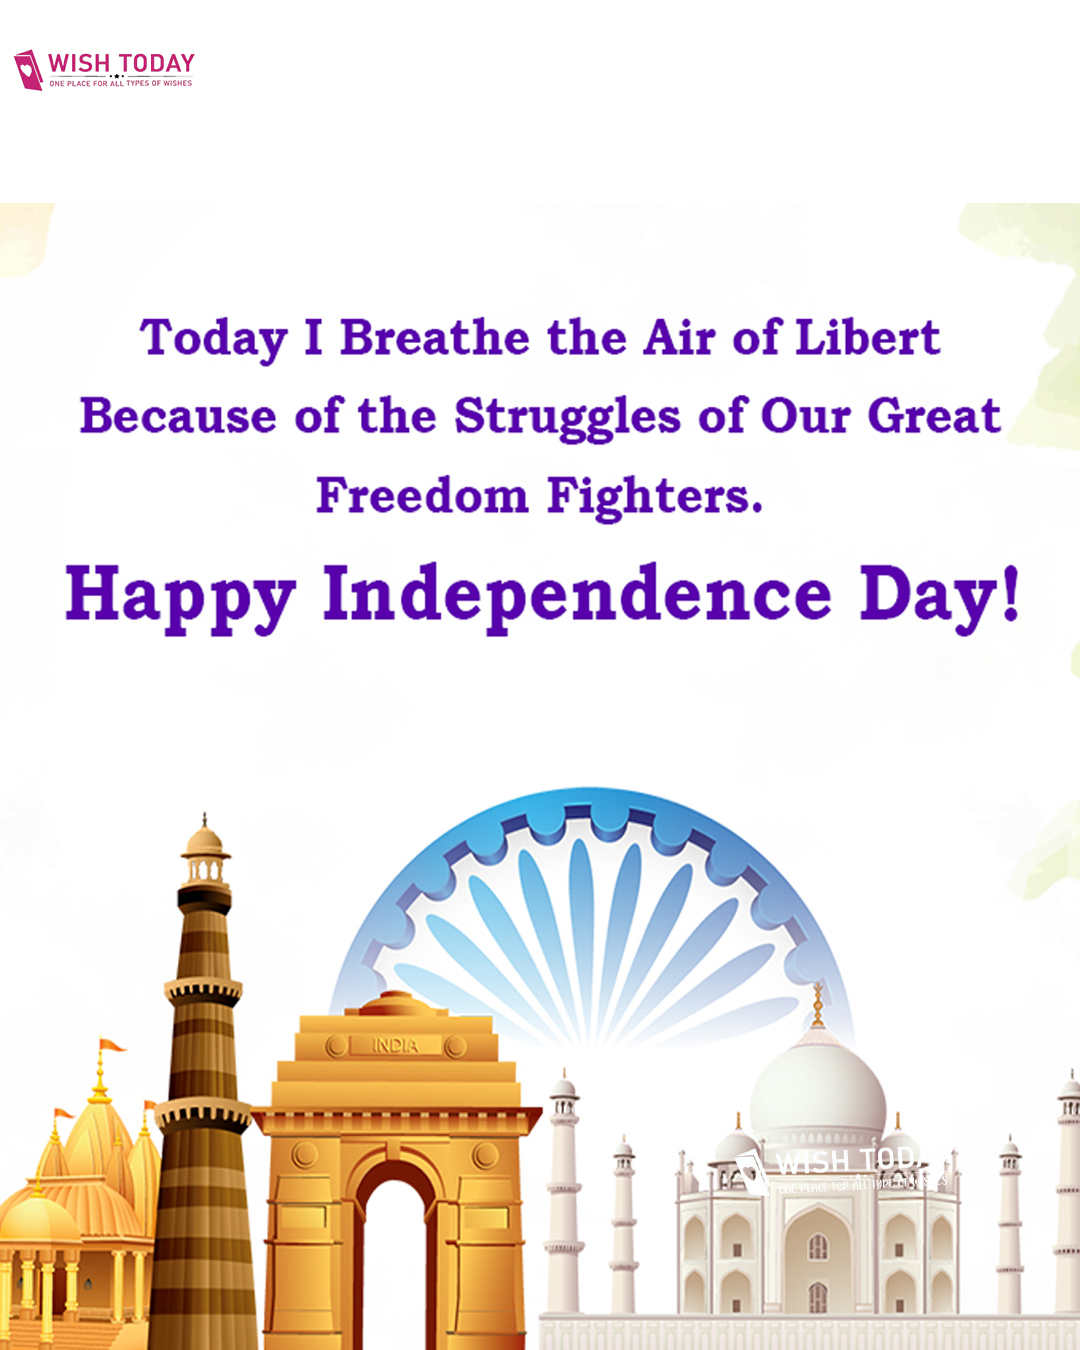 independence day images
happy independance day
indipendance day quote
independance day thoughts
75th independence day
happy independence day 2021
14 august
happy independence day images
independence day usa
15 august photo
74th independence day
15 august speech
american independence day
15 august independence day
happy independence day images 2021
us independence day
independence day date
independence day in hindi
75th independence day images
15 august image
brazil independence day
15 august speech in hindi
which independence day 2021
4th of july meaning
swatantrata diw